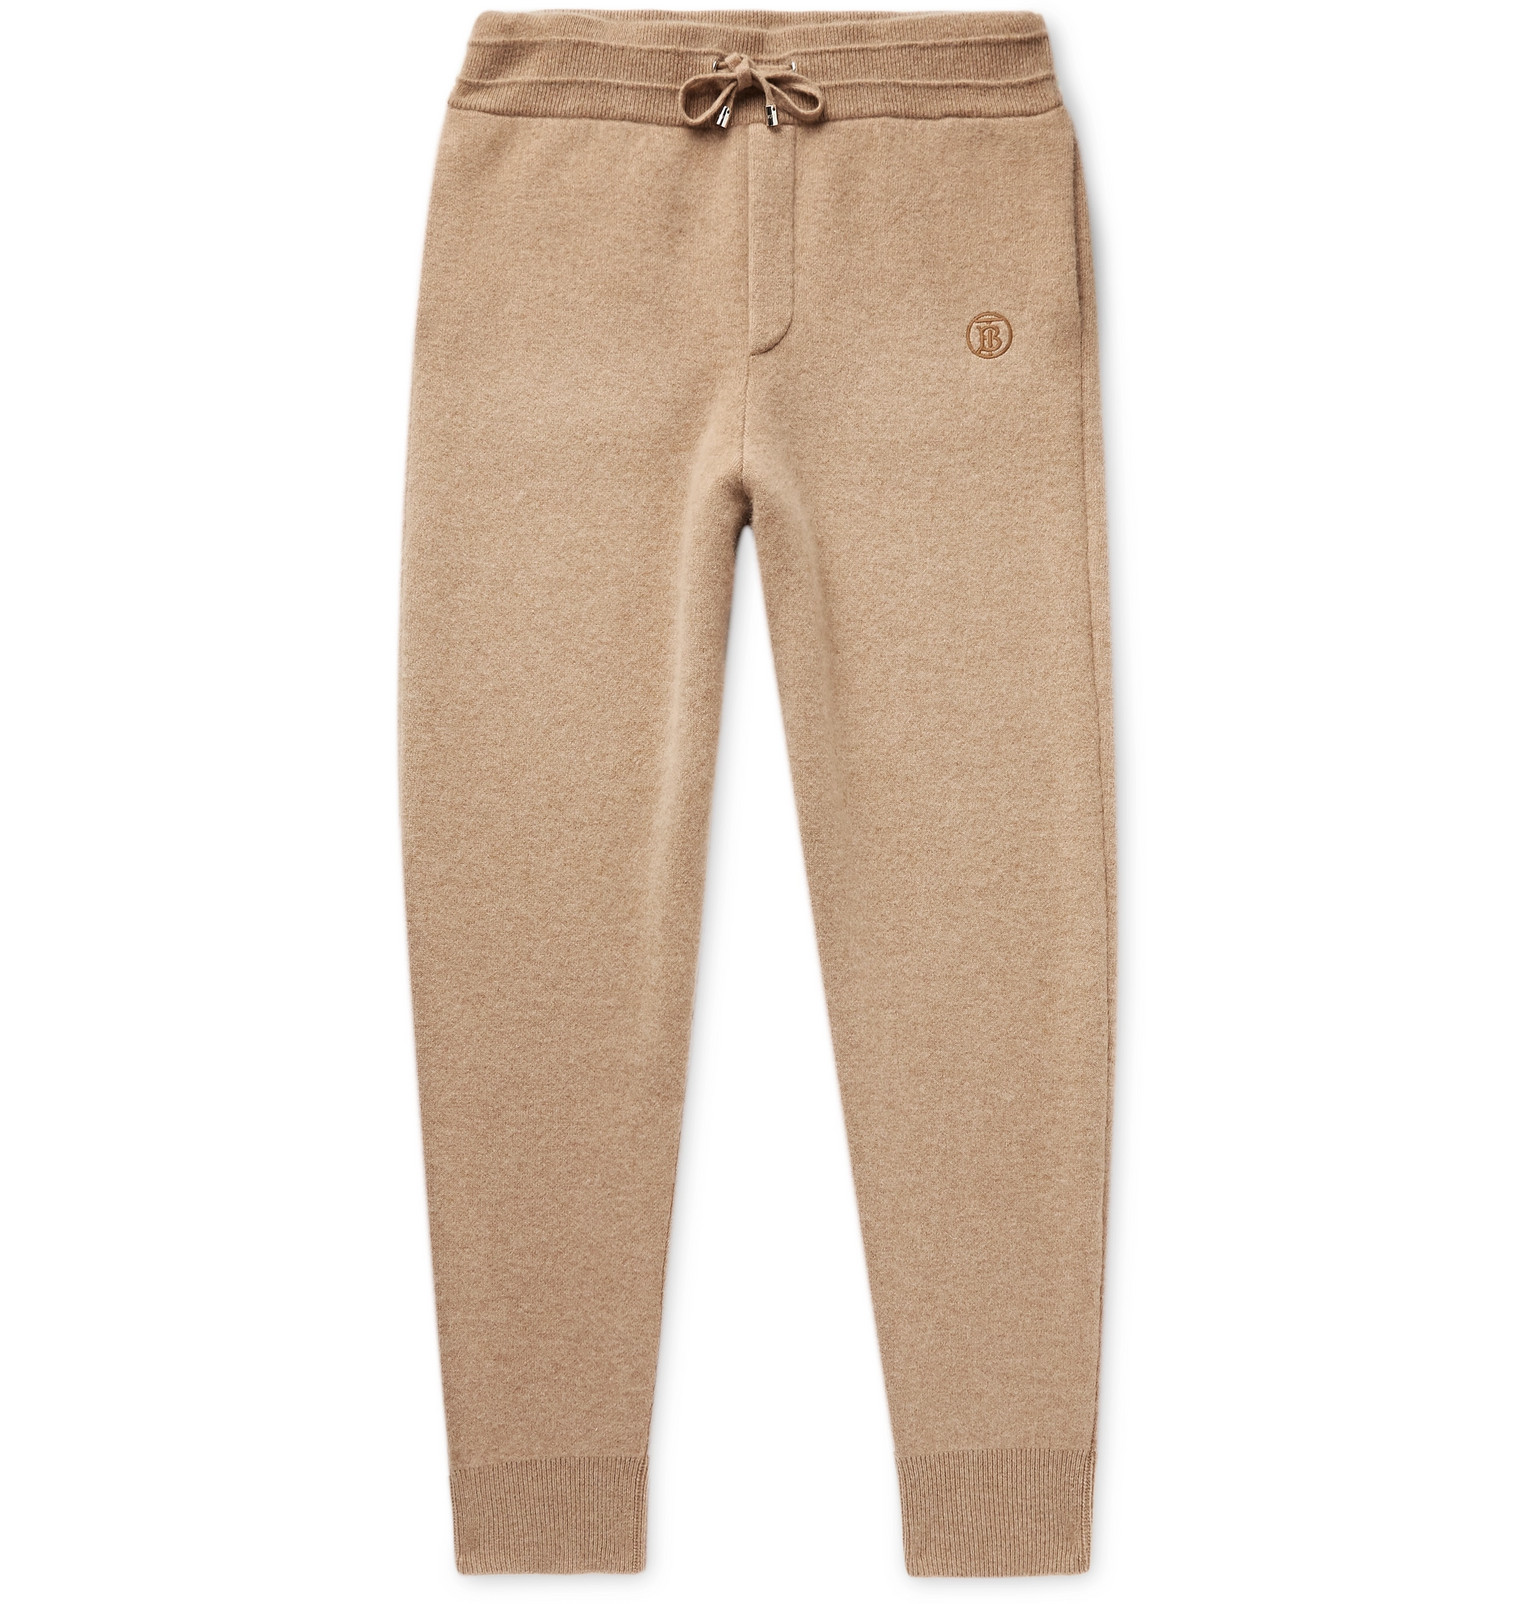 Burberry - Tapered Cashmere-Blend Sweatpants - Men - Brown | The ...